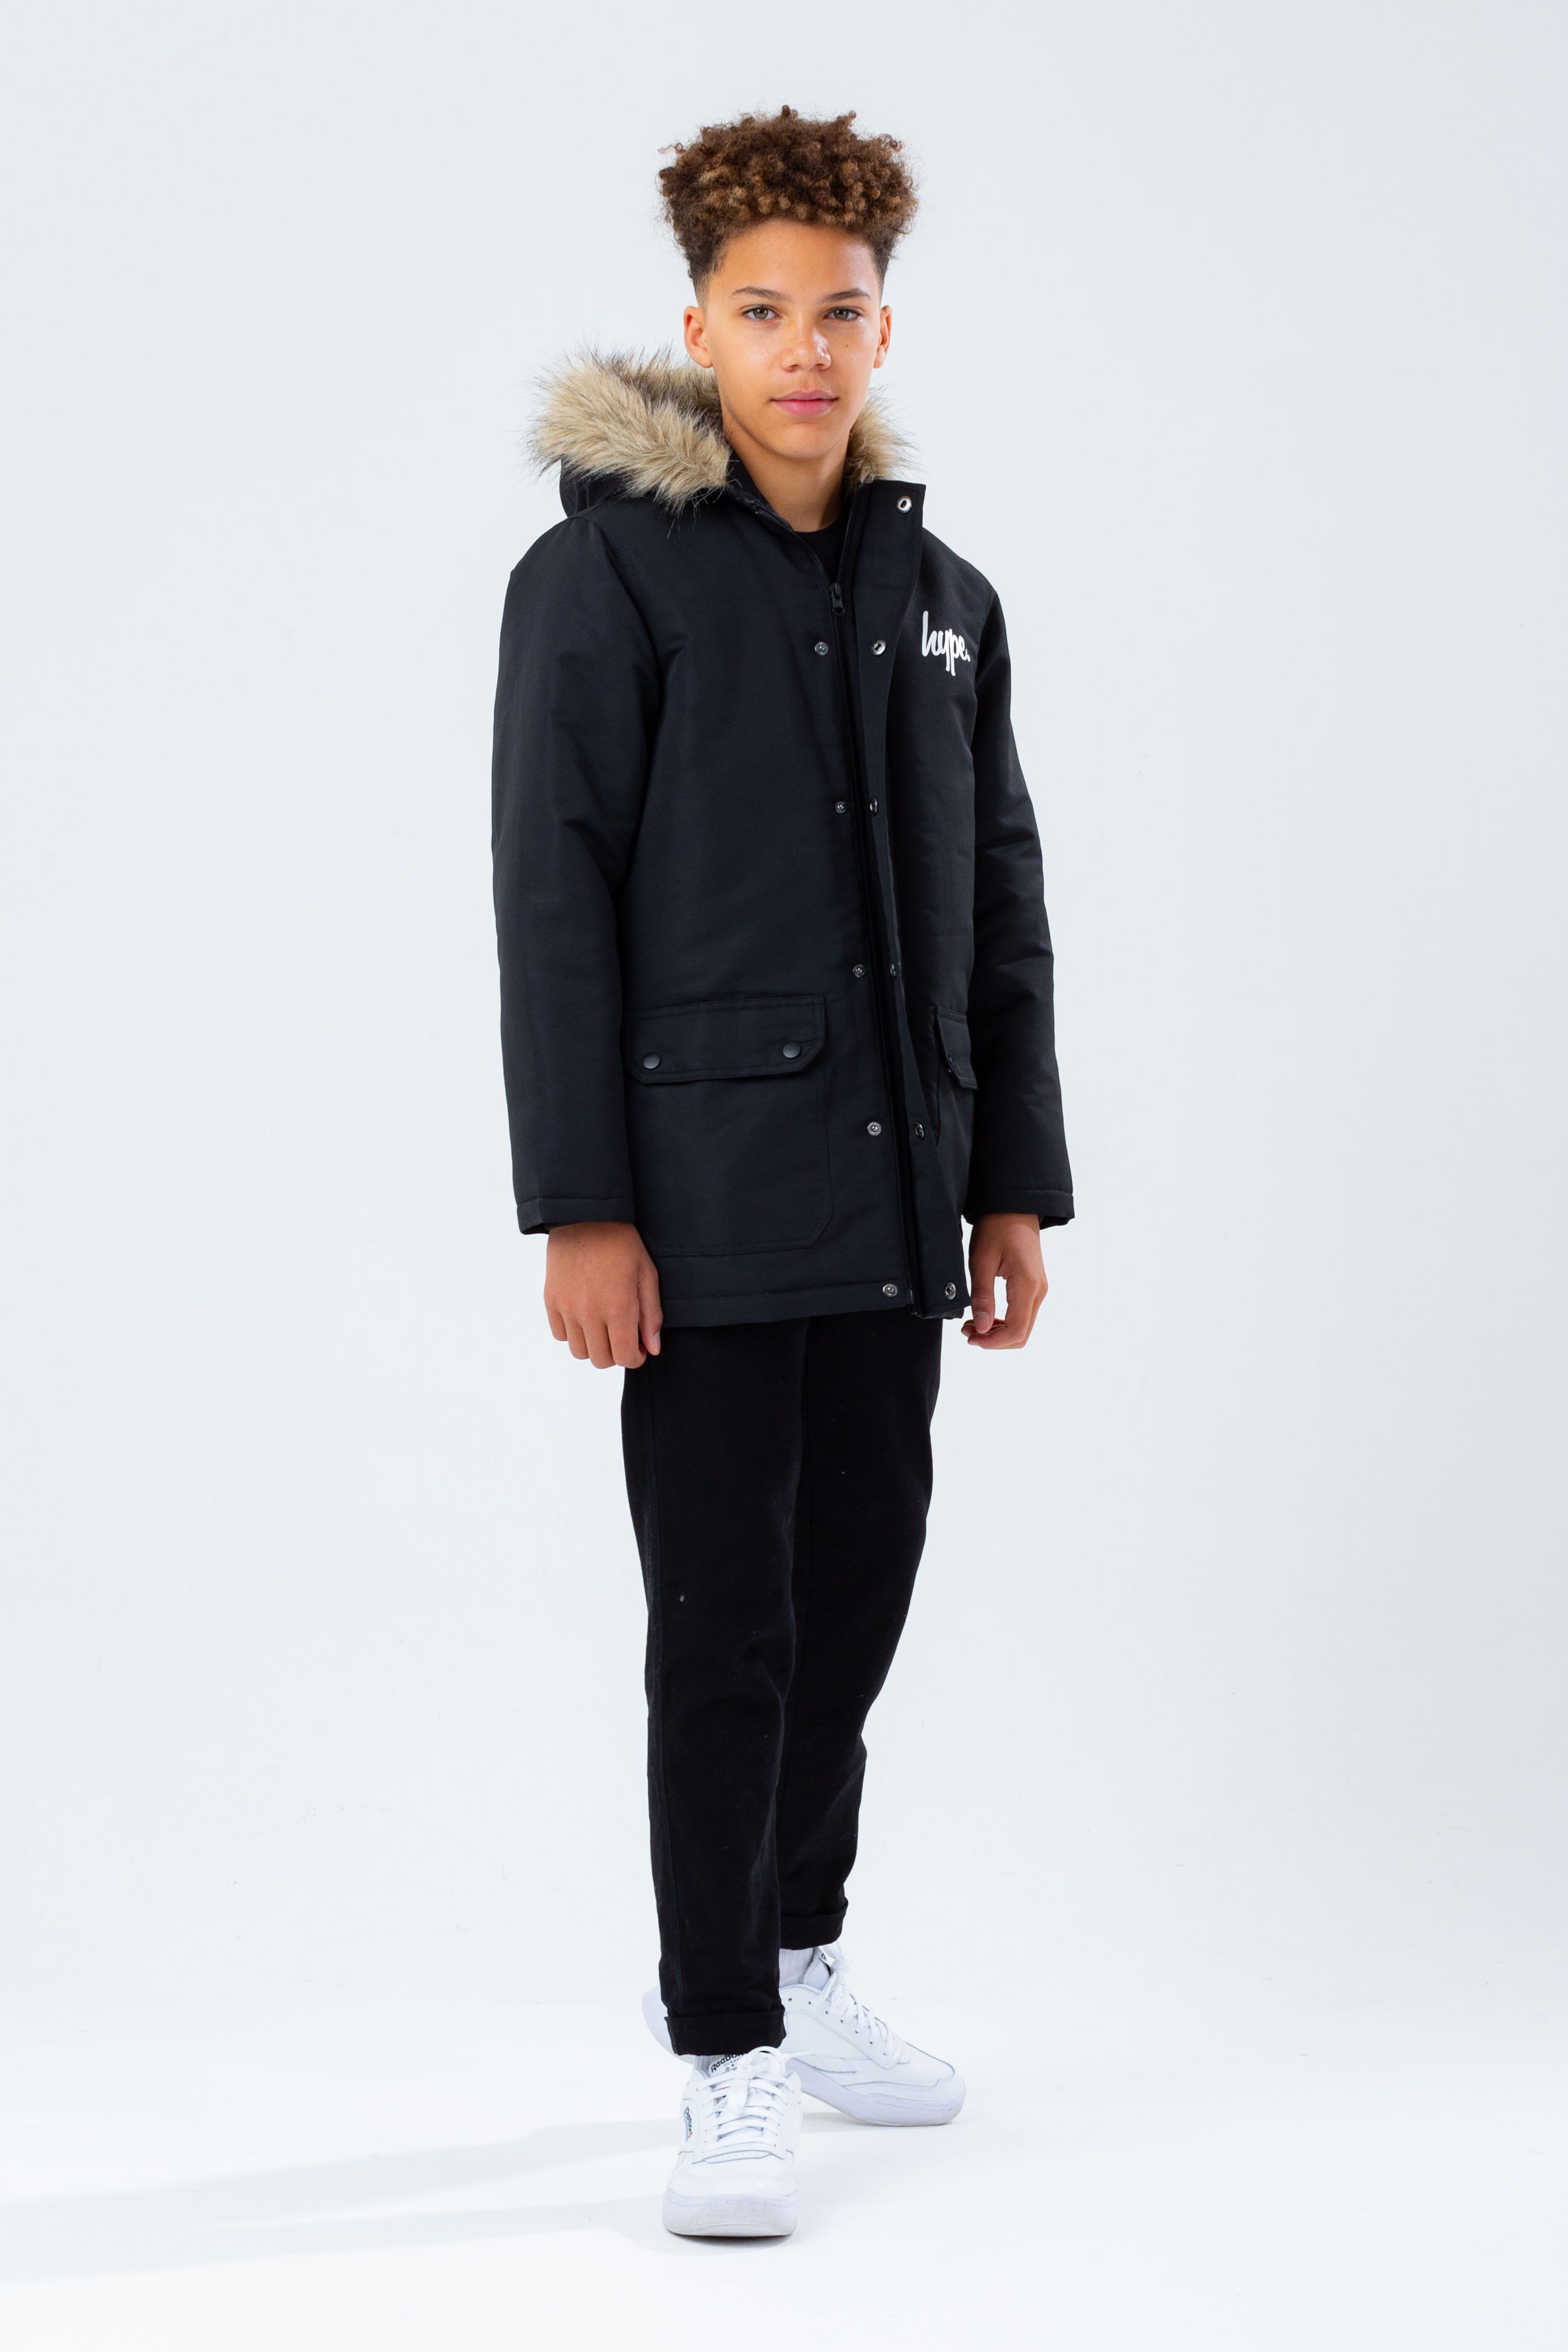 hype Junior Boys Kids Zip Crest Hoody in Black Ribbed Cuffs and Zip Fastening 